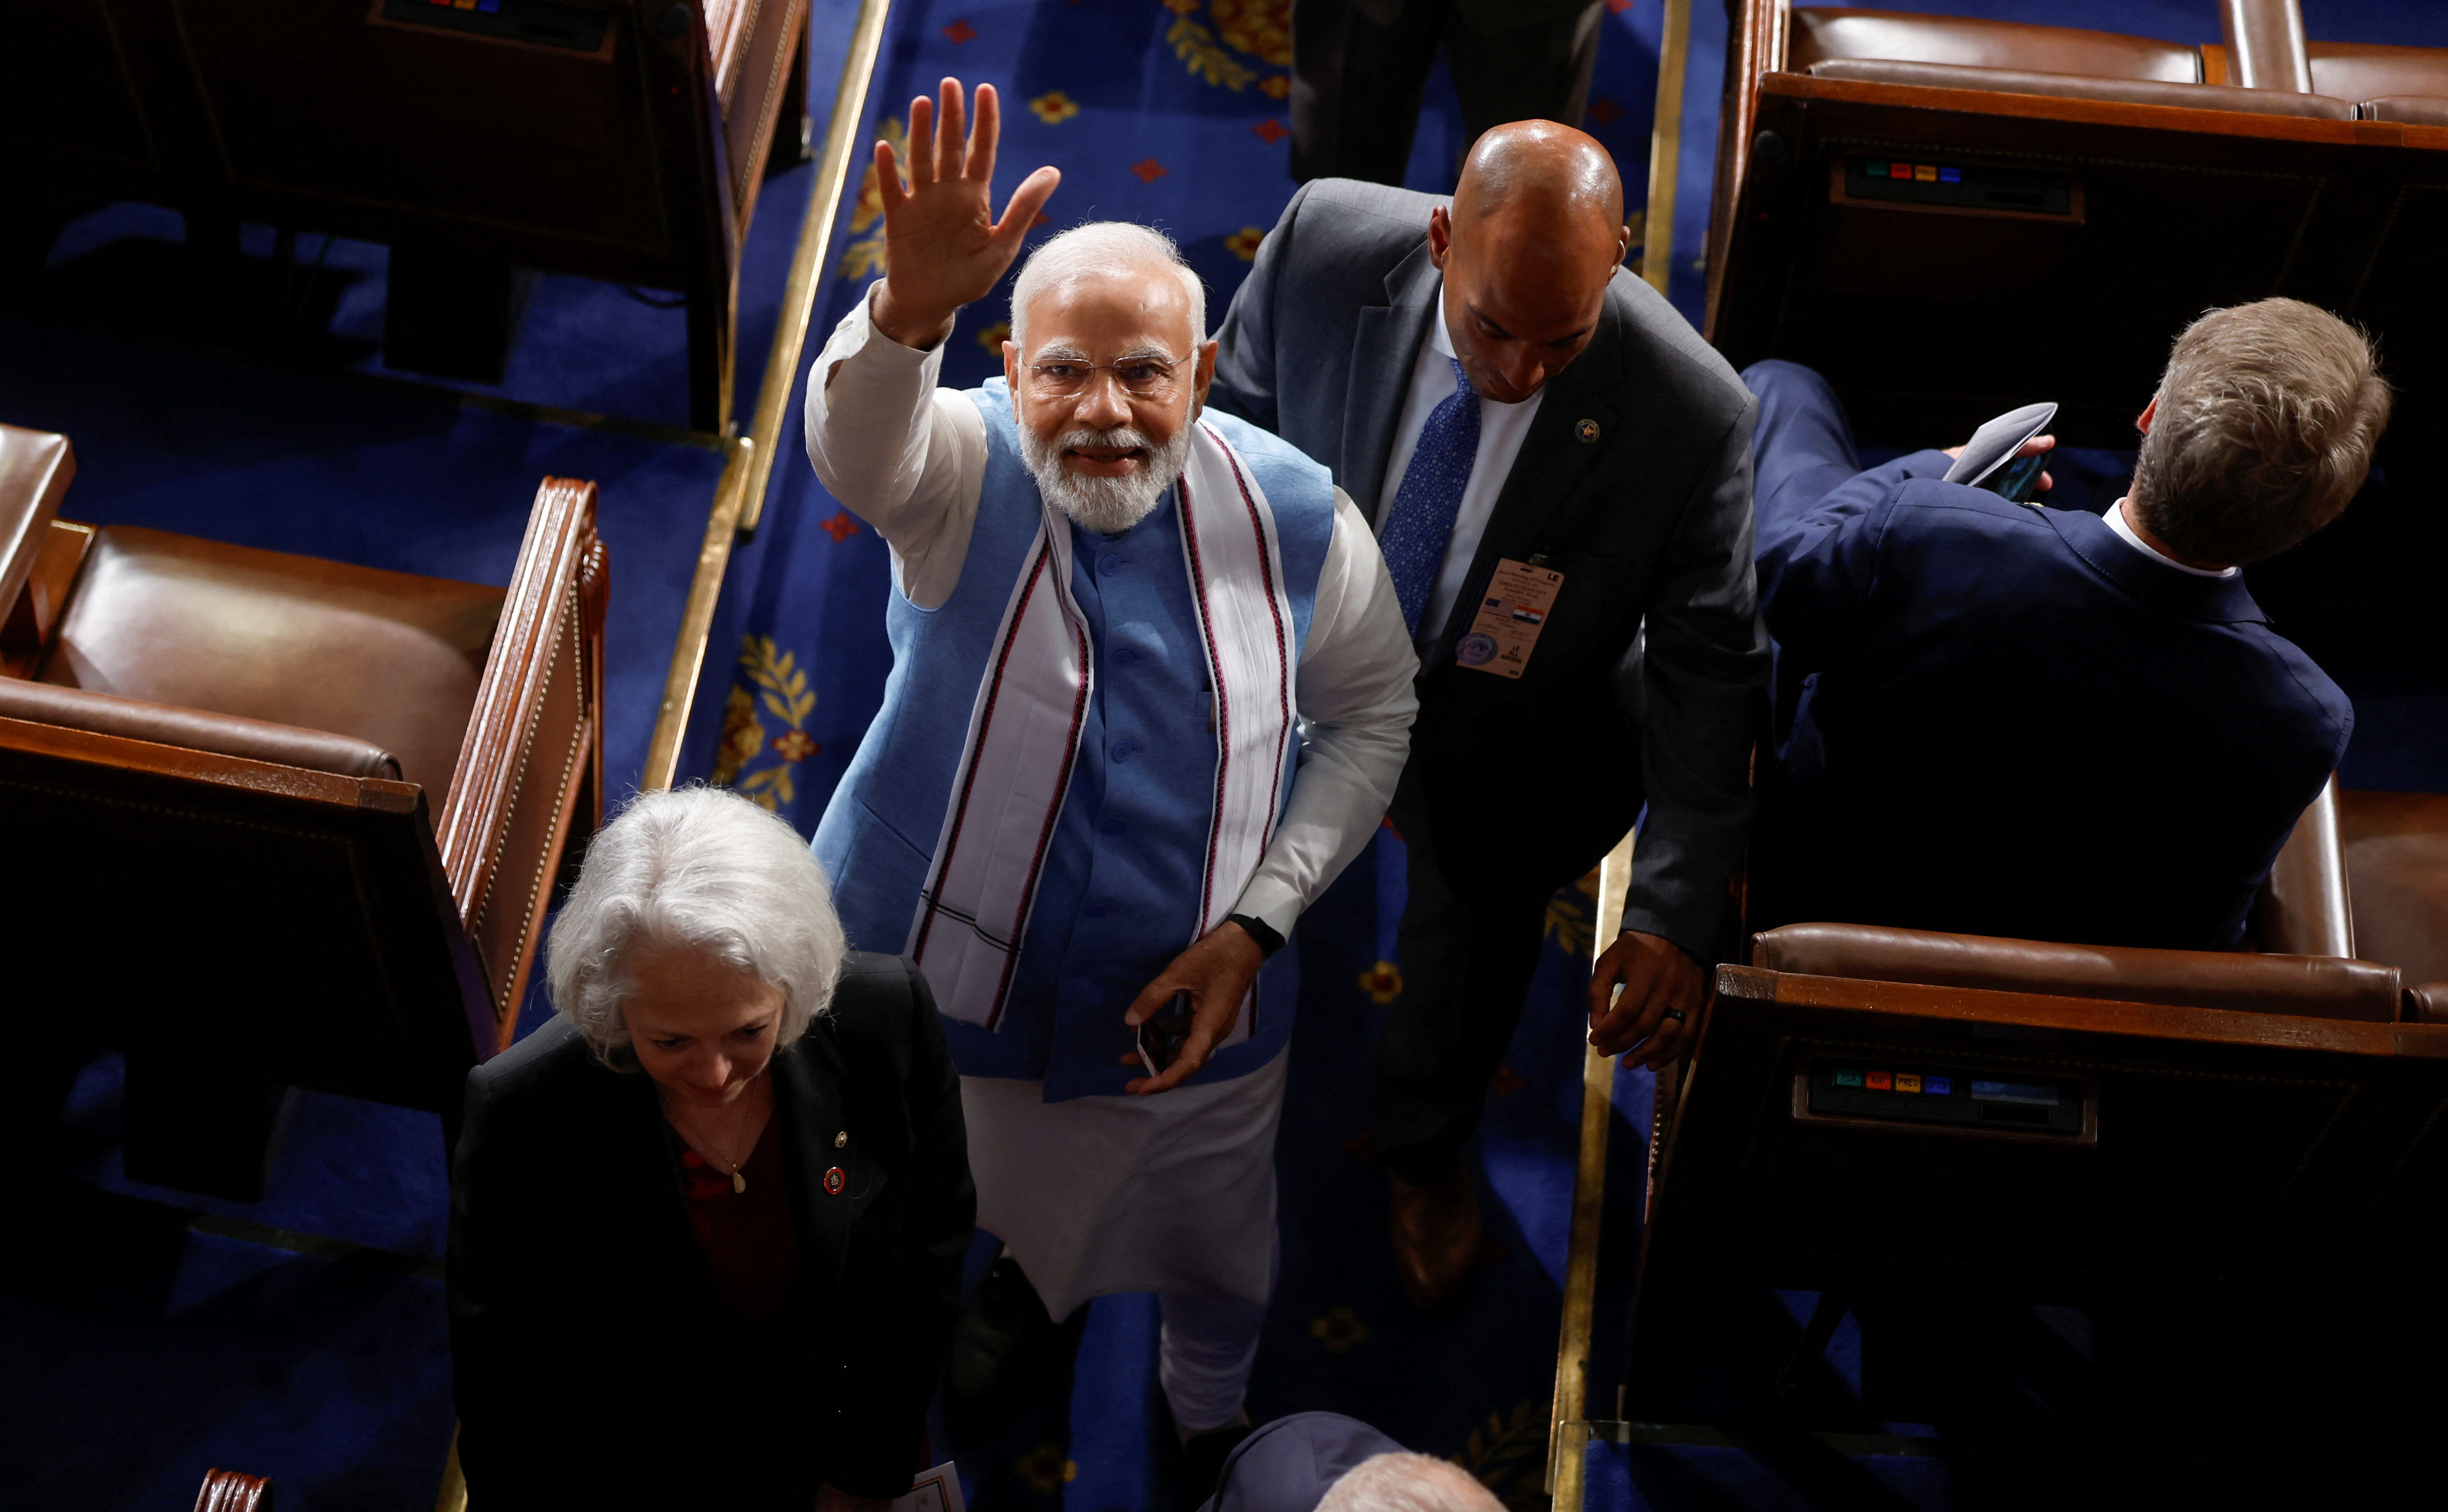 India's Prime Minister Modi wraps up official visit to United States 